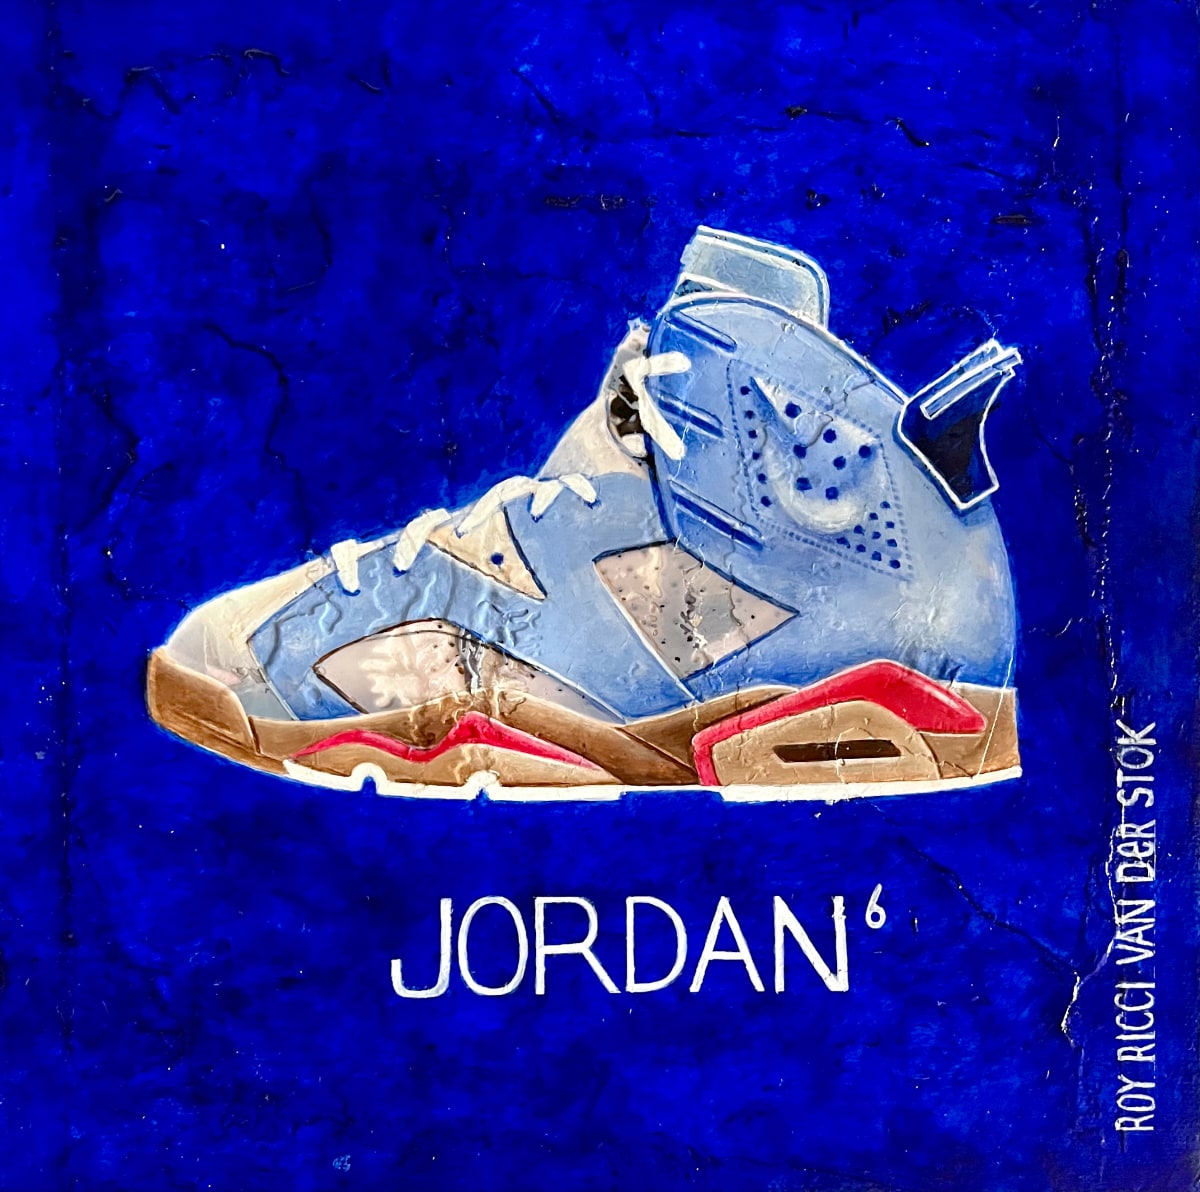 Jordan 6, One of Favo and Never-Have by Roy Ricci van der Stok 